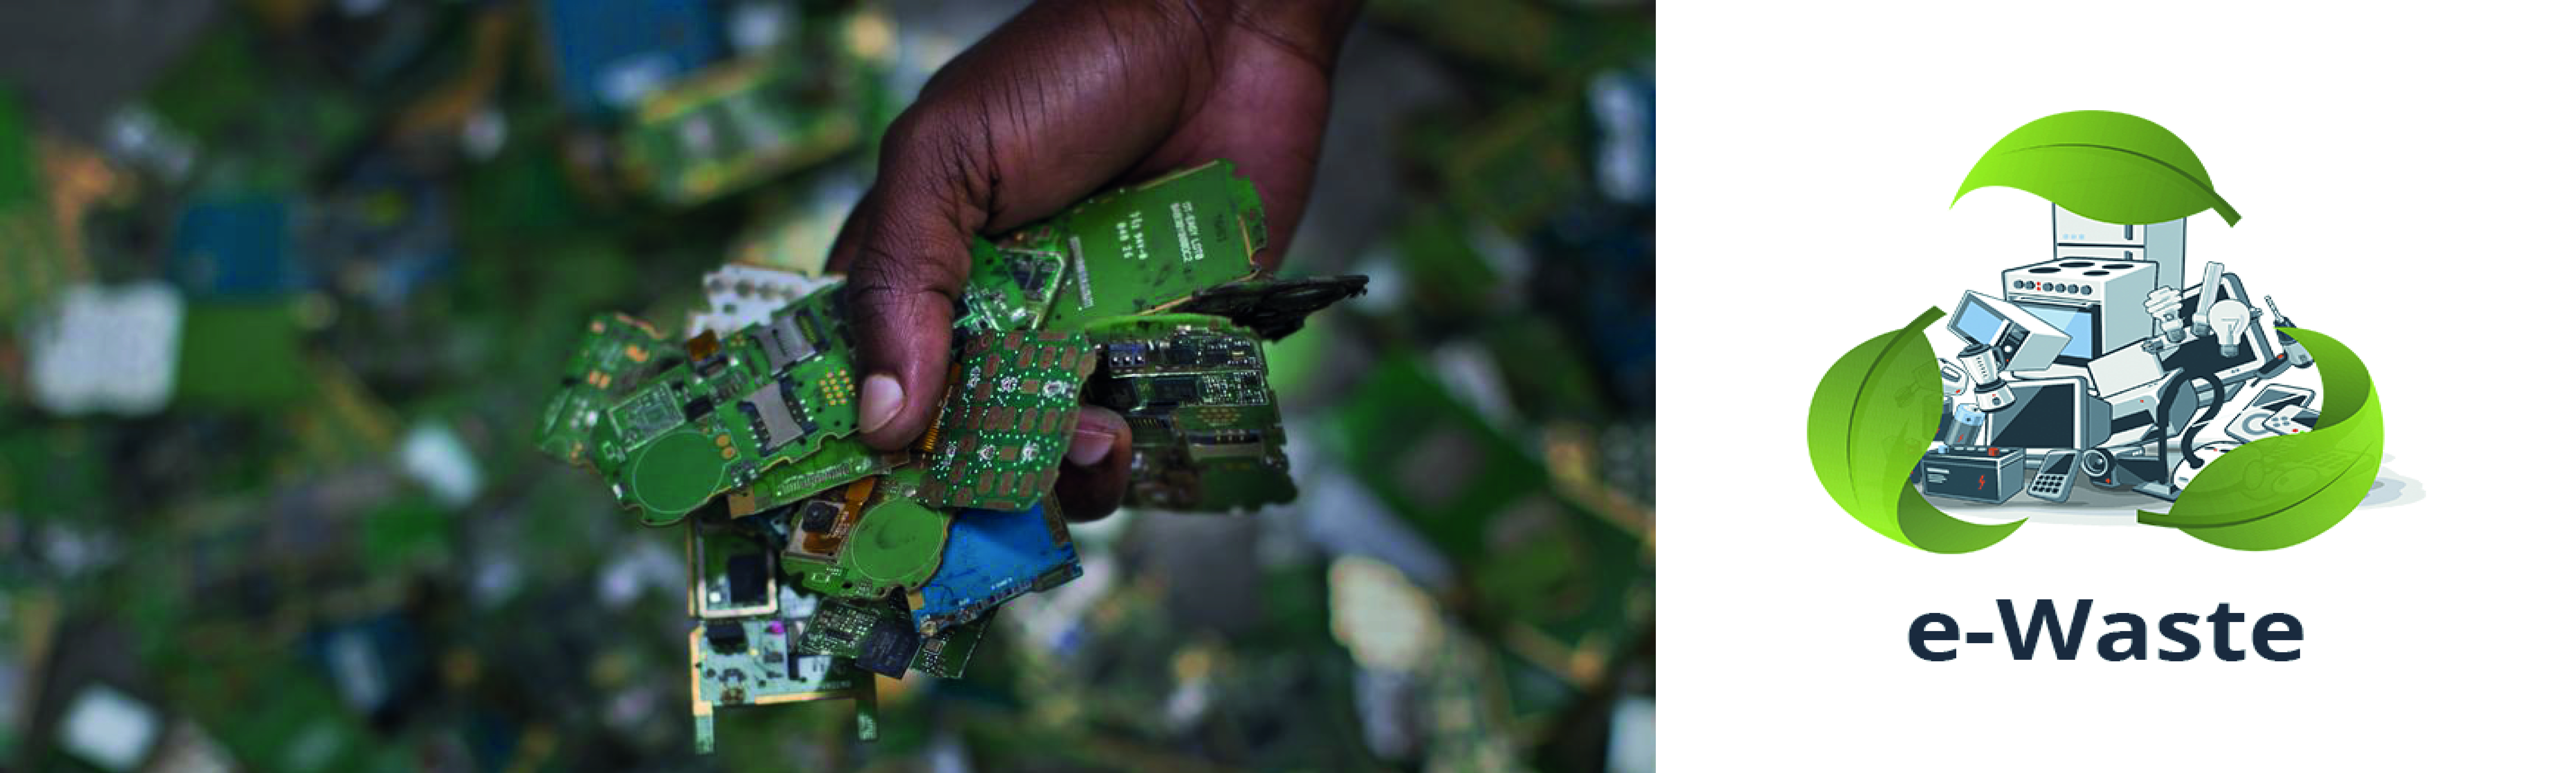 Did you know that only 1% of e-waste is recycled?